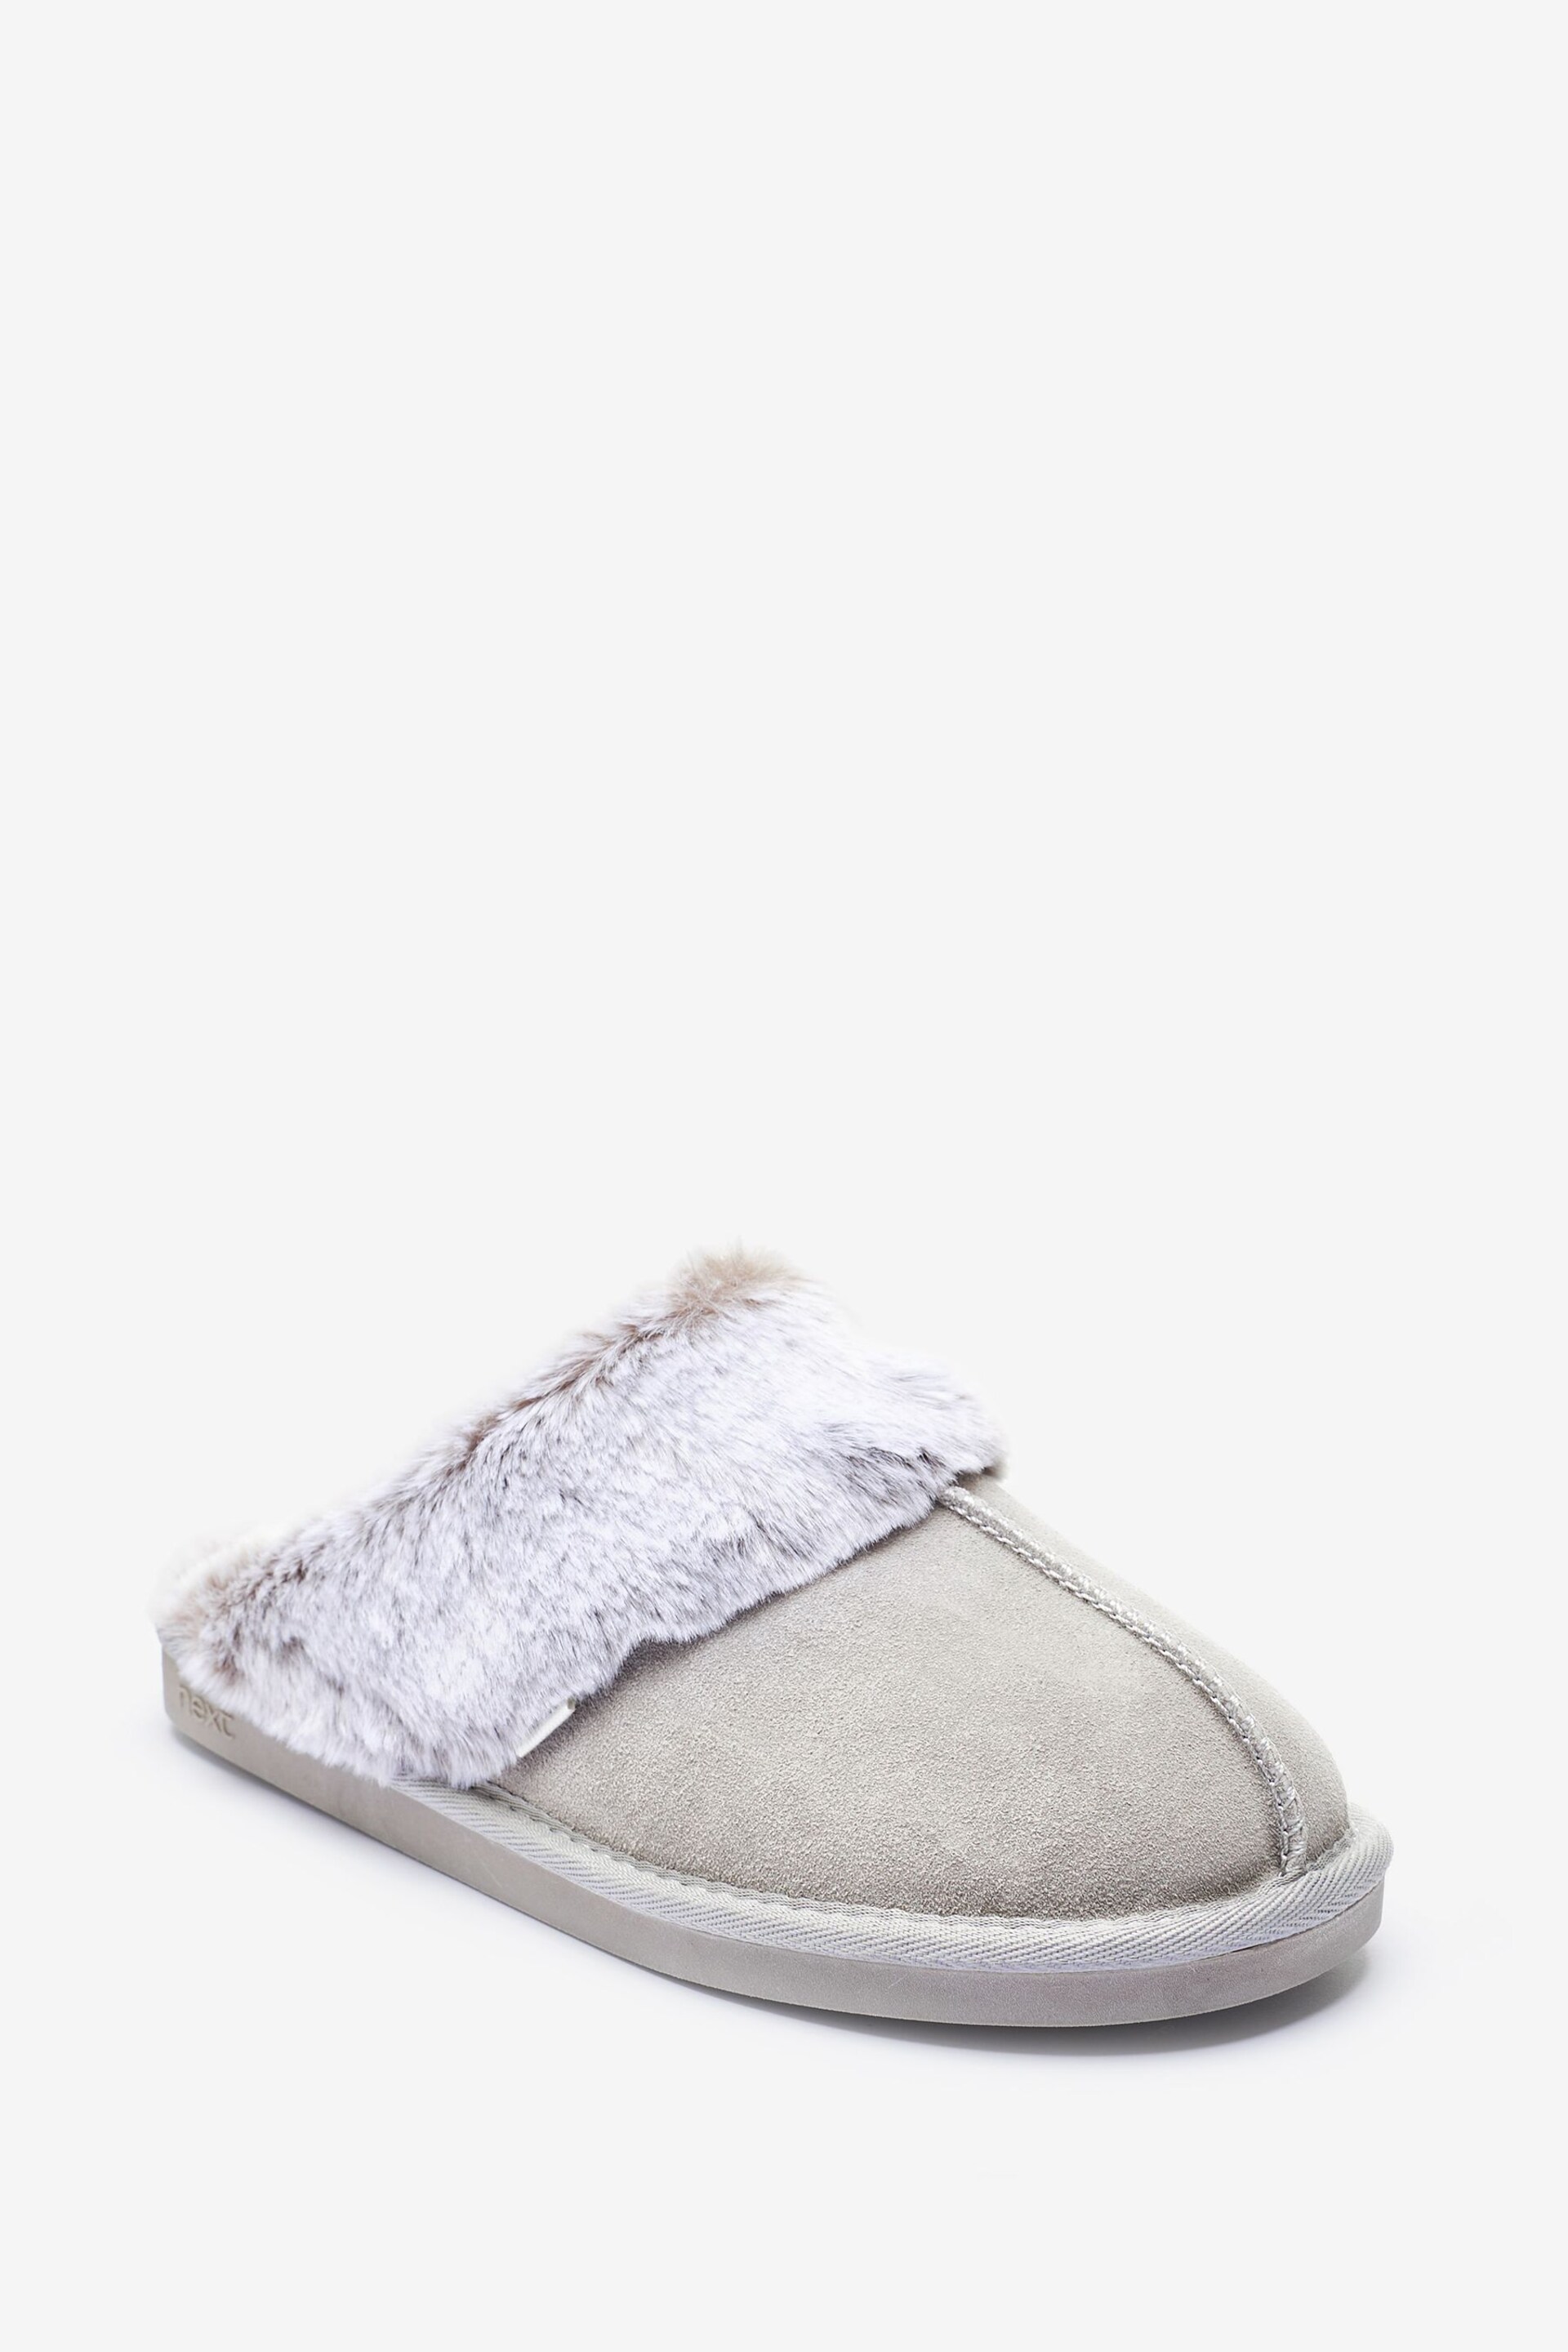 Pale Grey Suede Faux Fur Lined Mule Slippers - Image 3 of 5